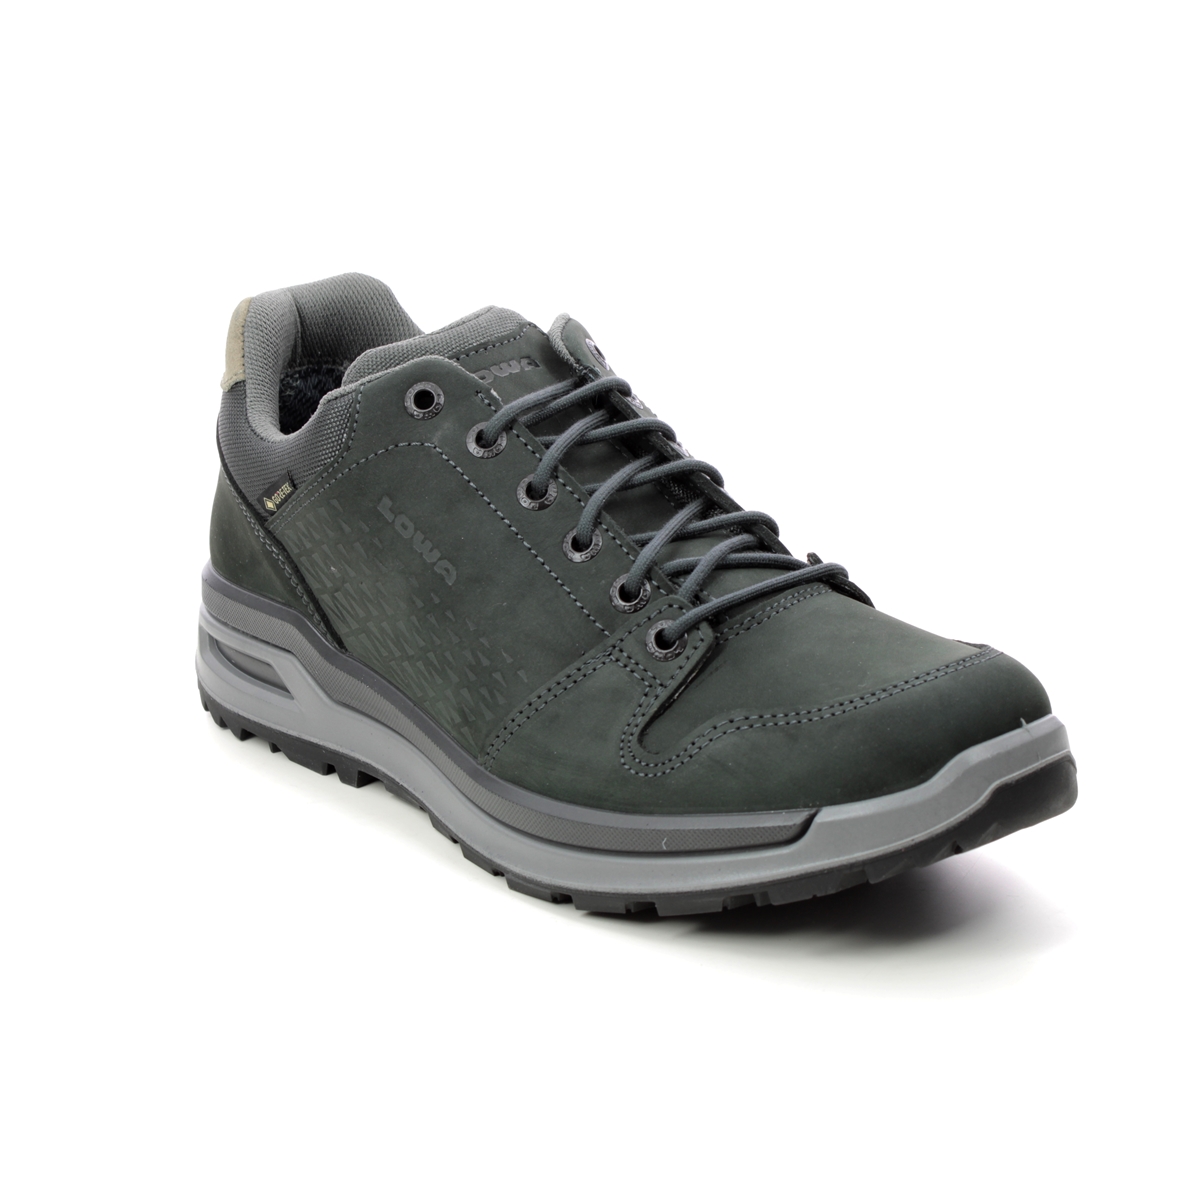 Lowa Locarno Gtx Mens Dark grey nubuck Mens Walking Shoes 310812-0937 in a Plain Leather and Man-made in Size 10